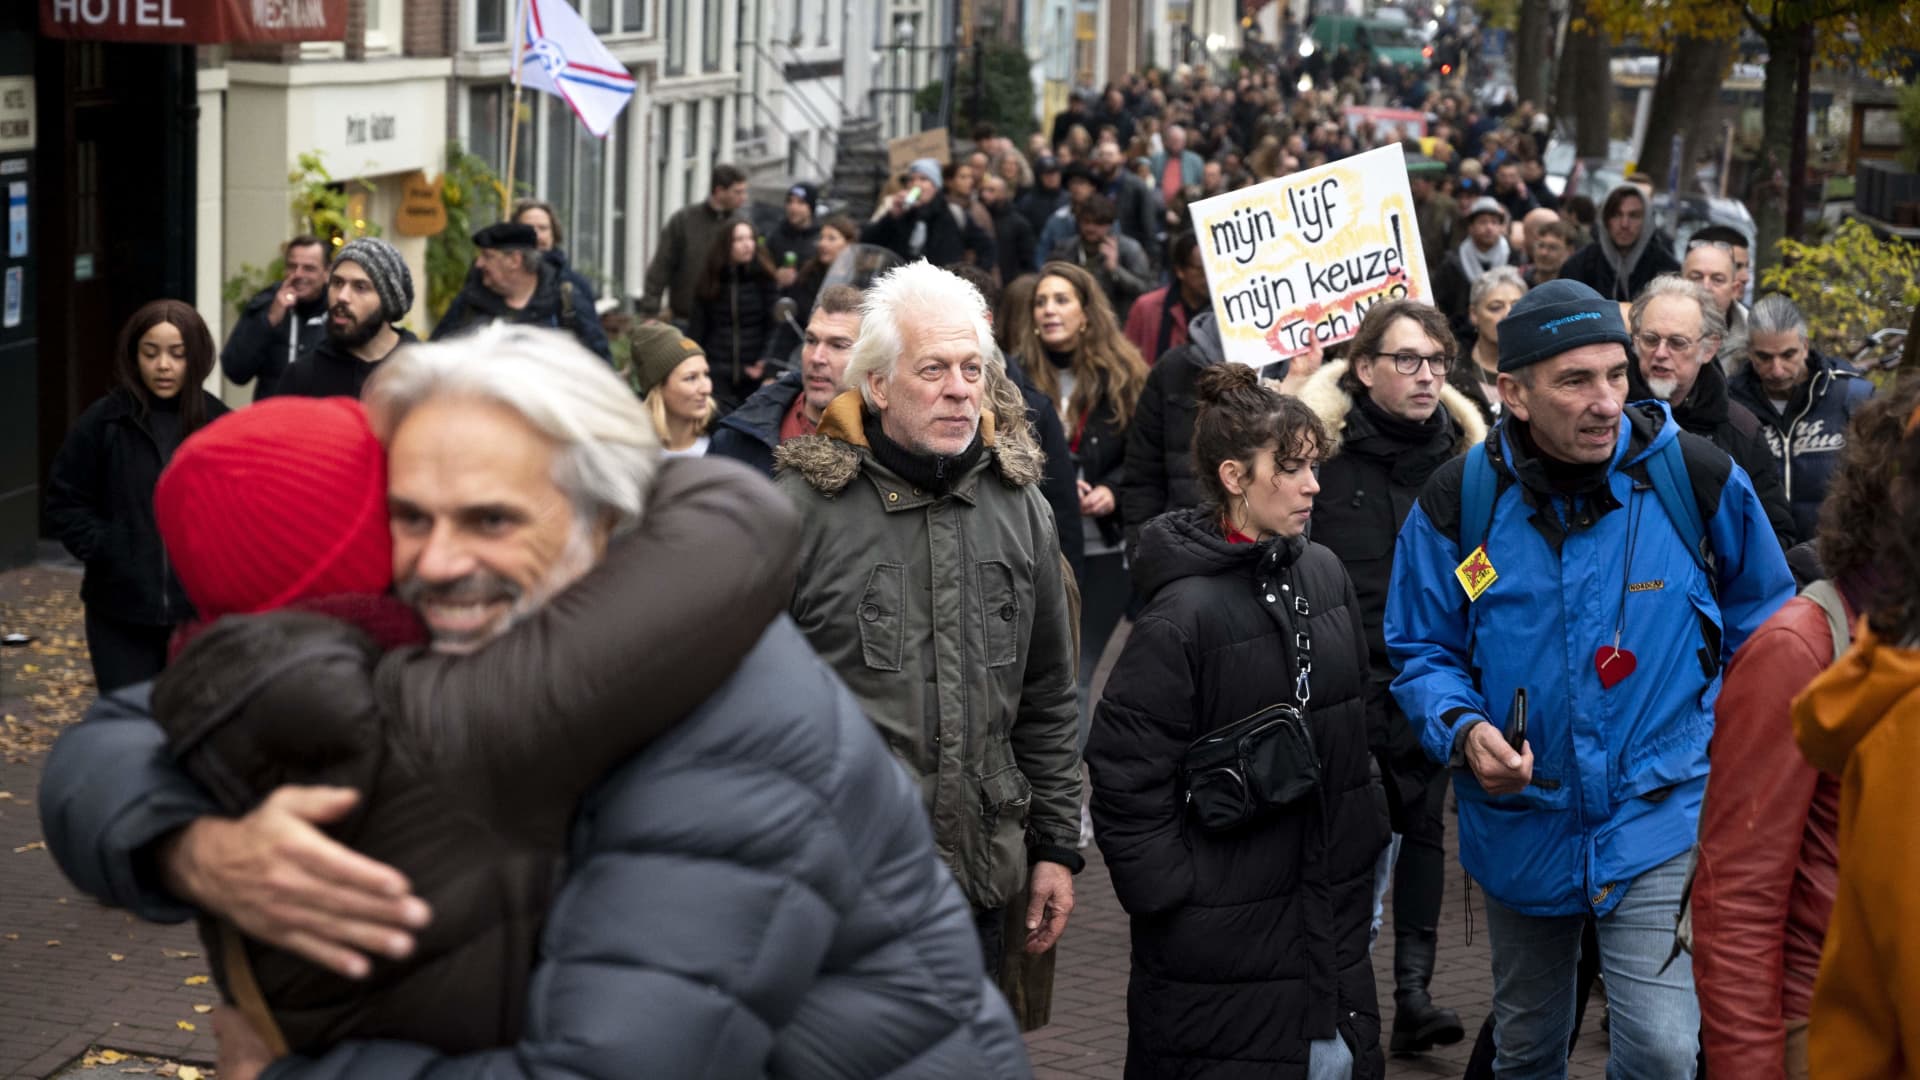 People march during a protest against the latest measures to fight the Covid-19 pandemic, despite the cancellation of the event after violence marred protests in Rotterdam, on November 20, 2021 in Amsterdam.